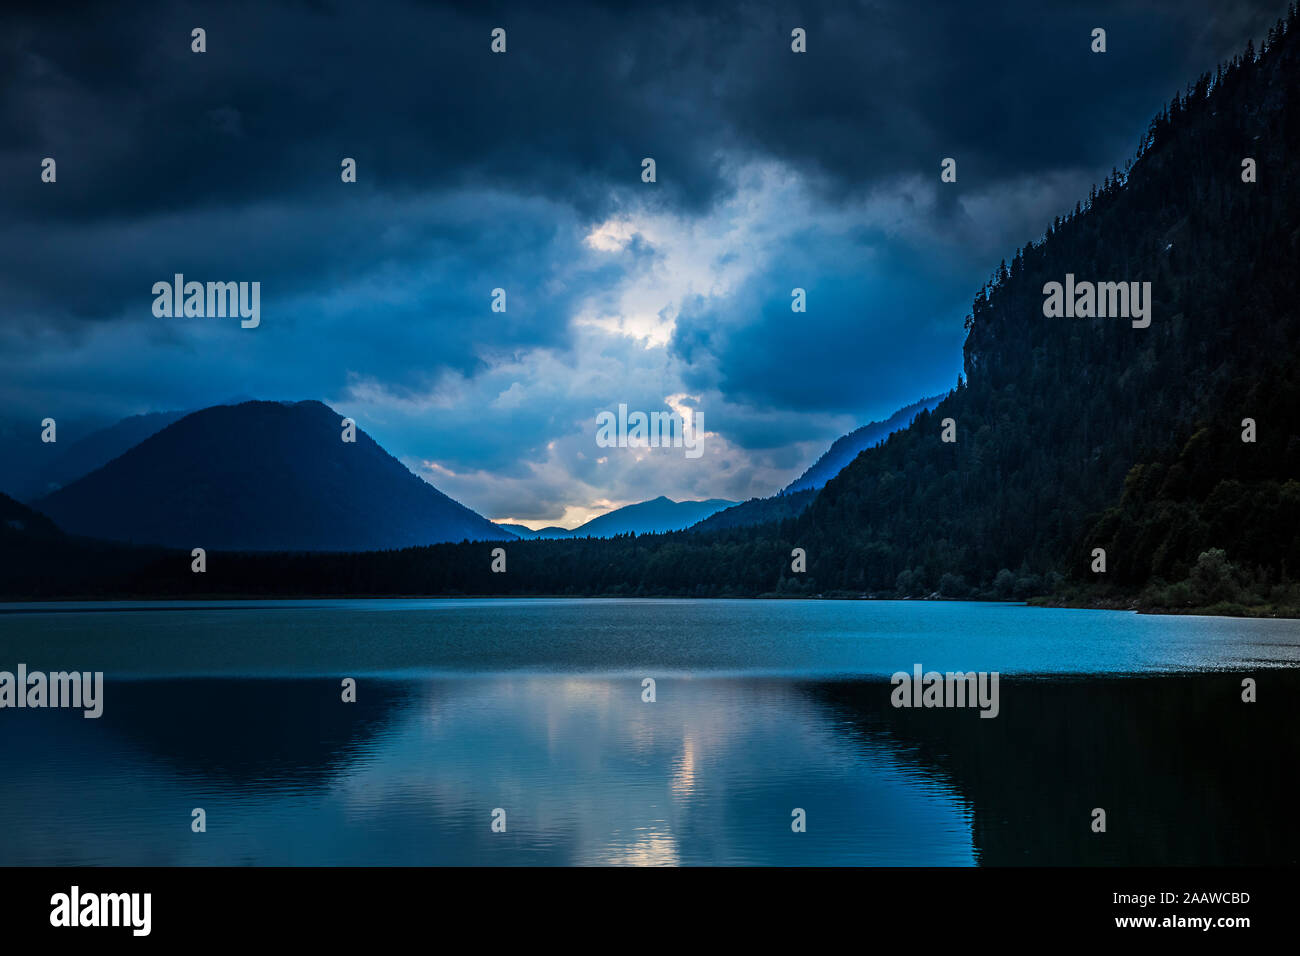 Scenic view of Sylvenstein Lake and silhouette mountains against cloudy sky, Bavaria, Germany Stock Photo